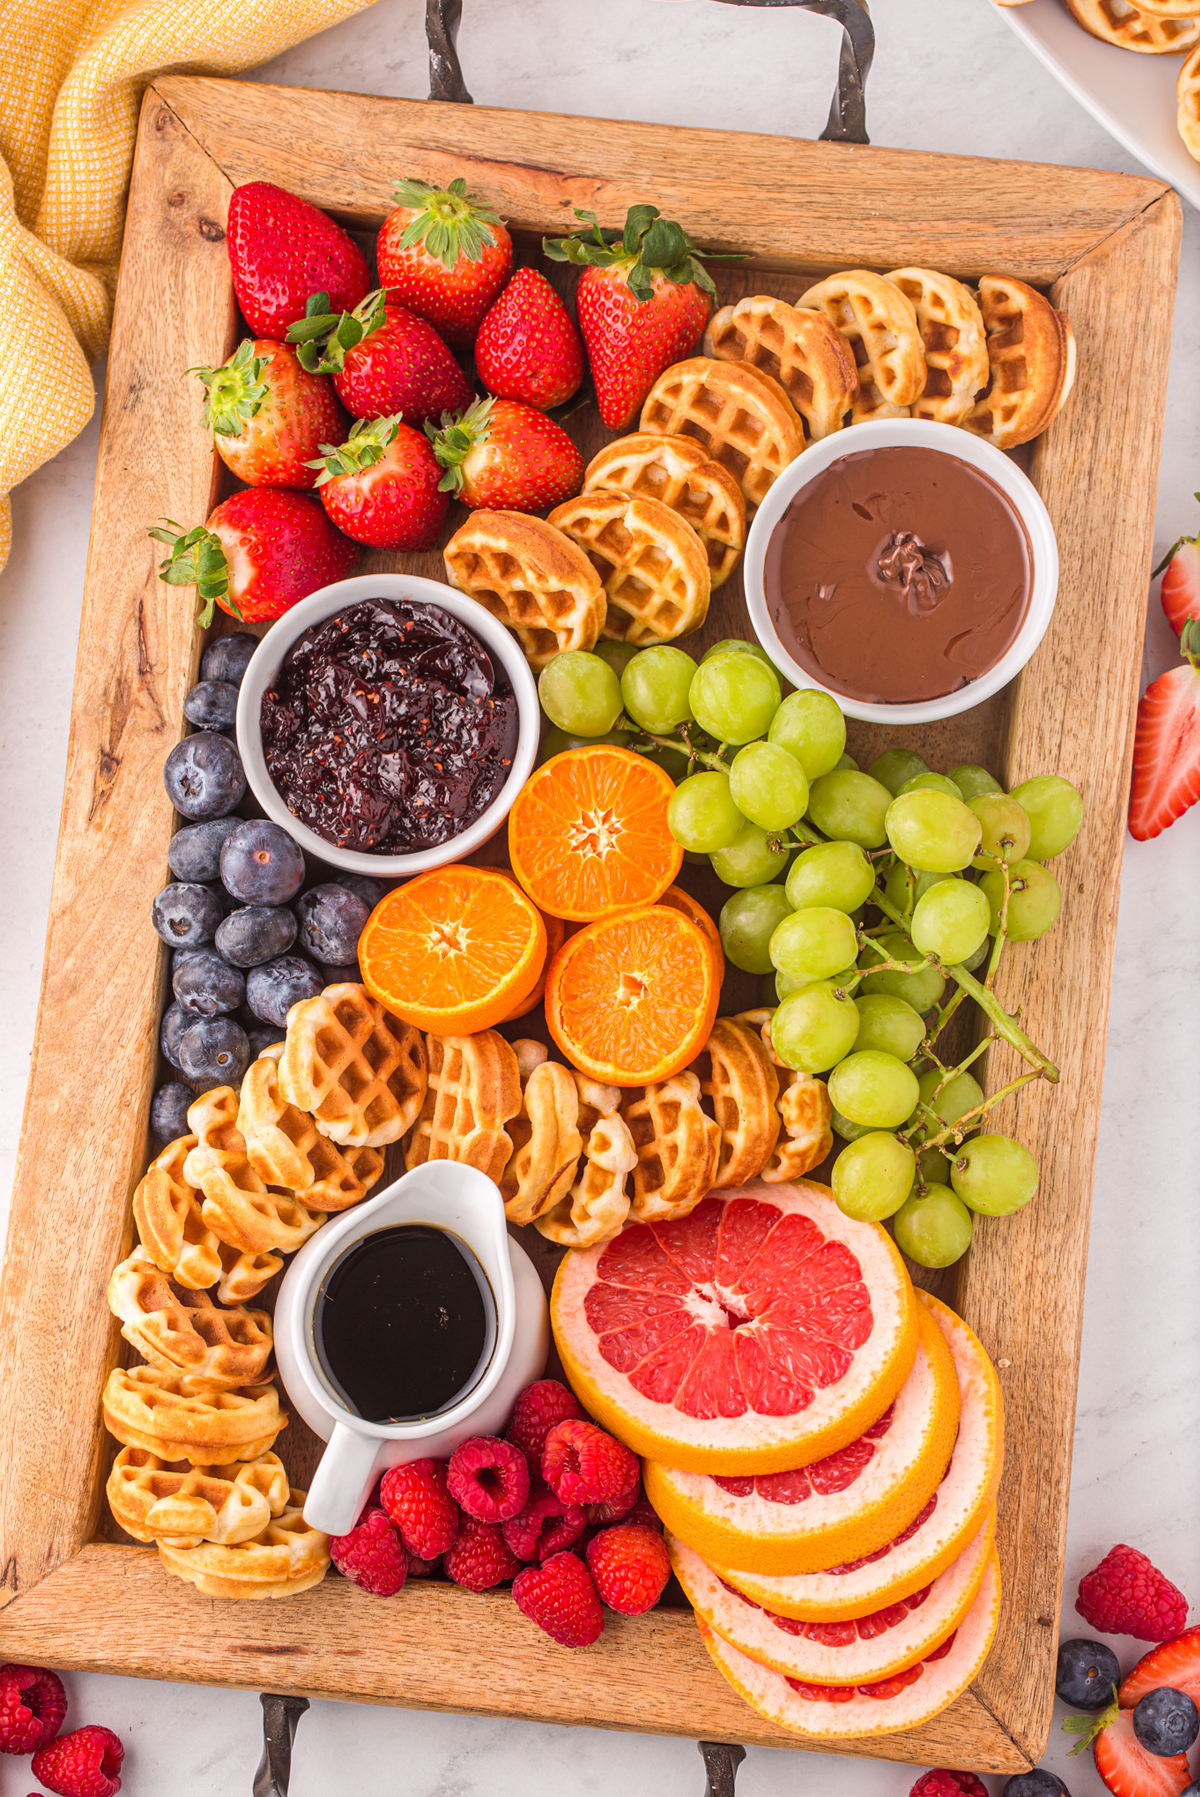 mini waffles, fruits, jams, and nutella fill this board from blackberry babe.